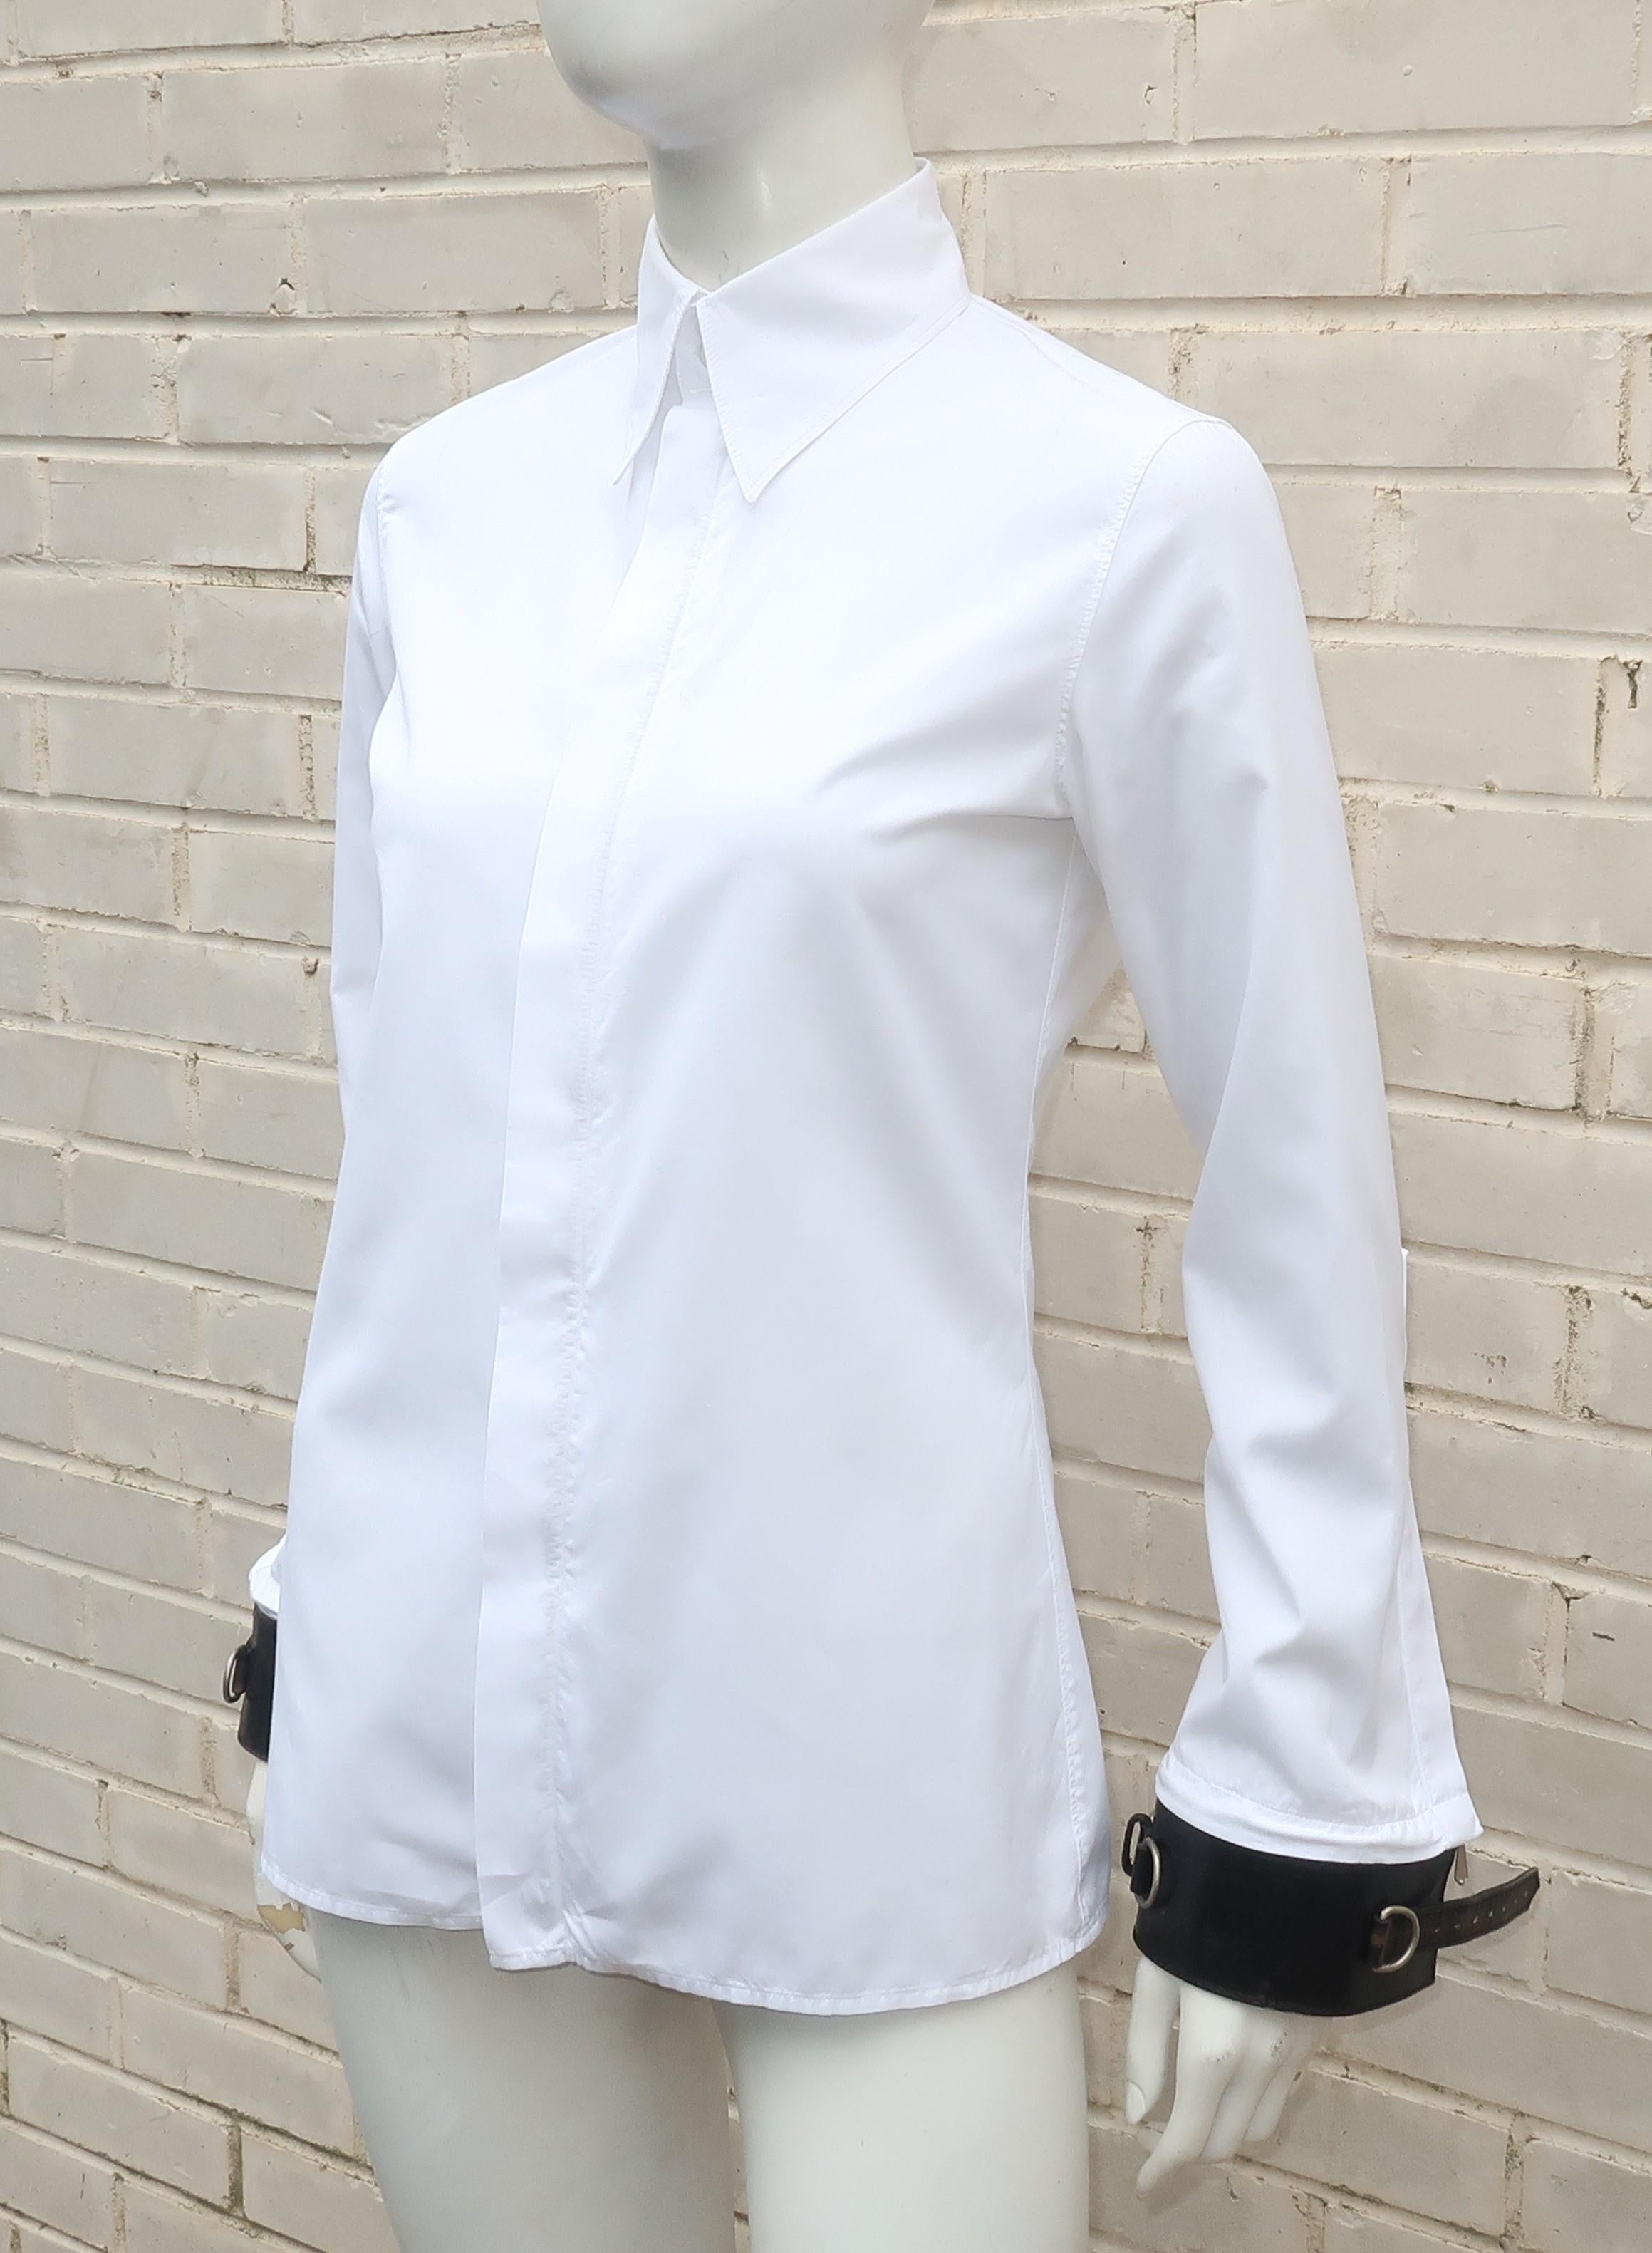 Jean Paul Gaultier White Shirt With Black Leather Restraint Cuffs  2